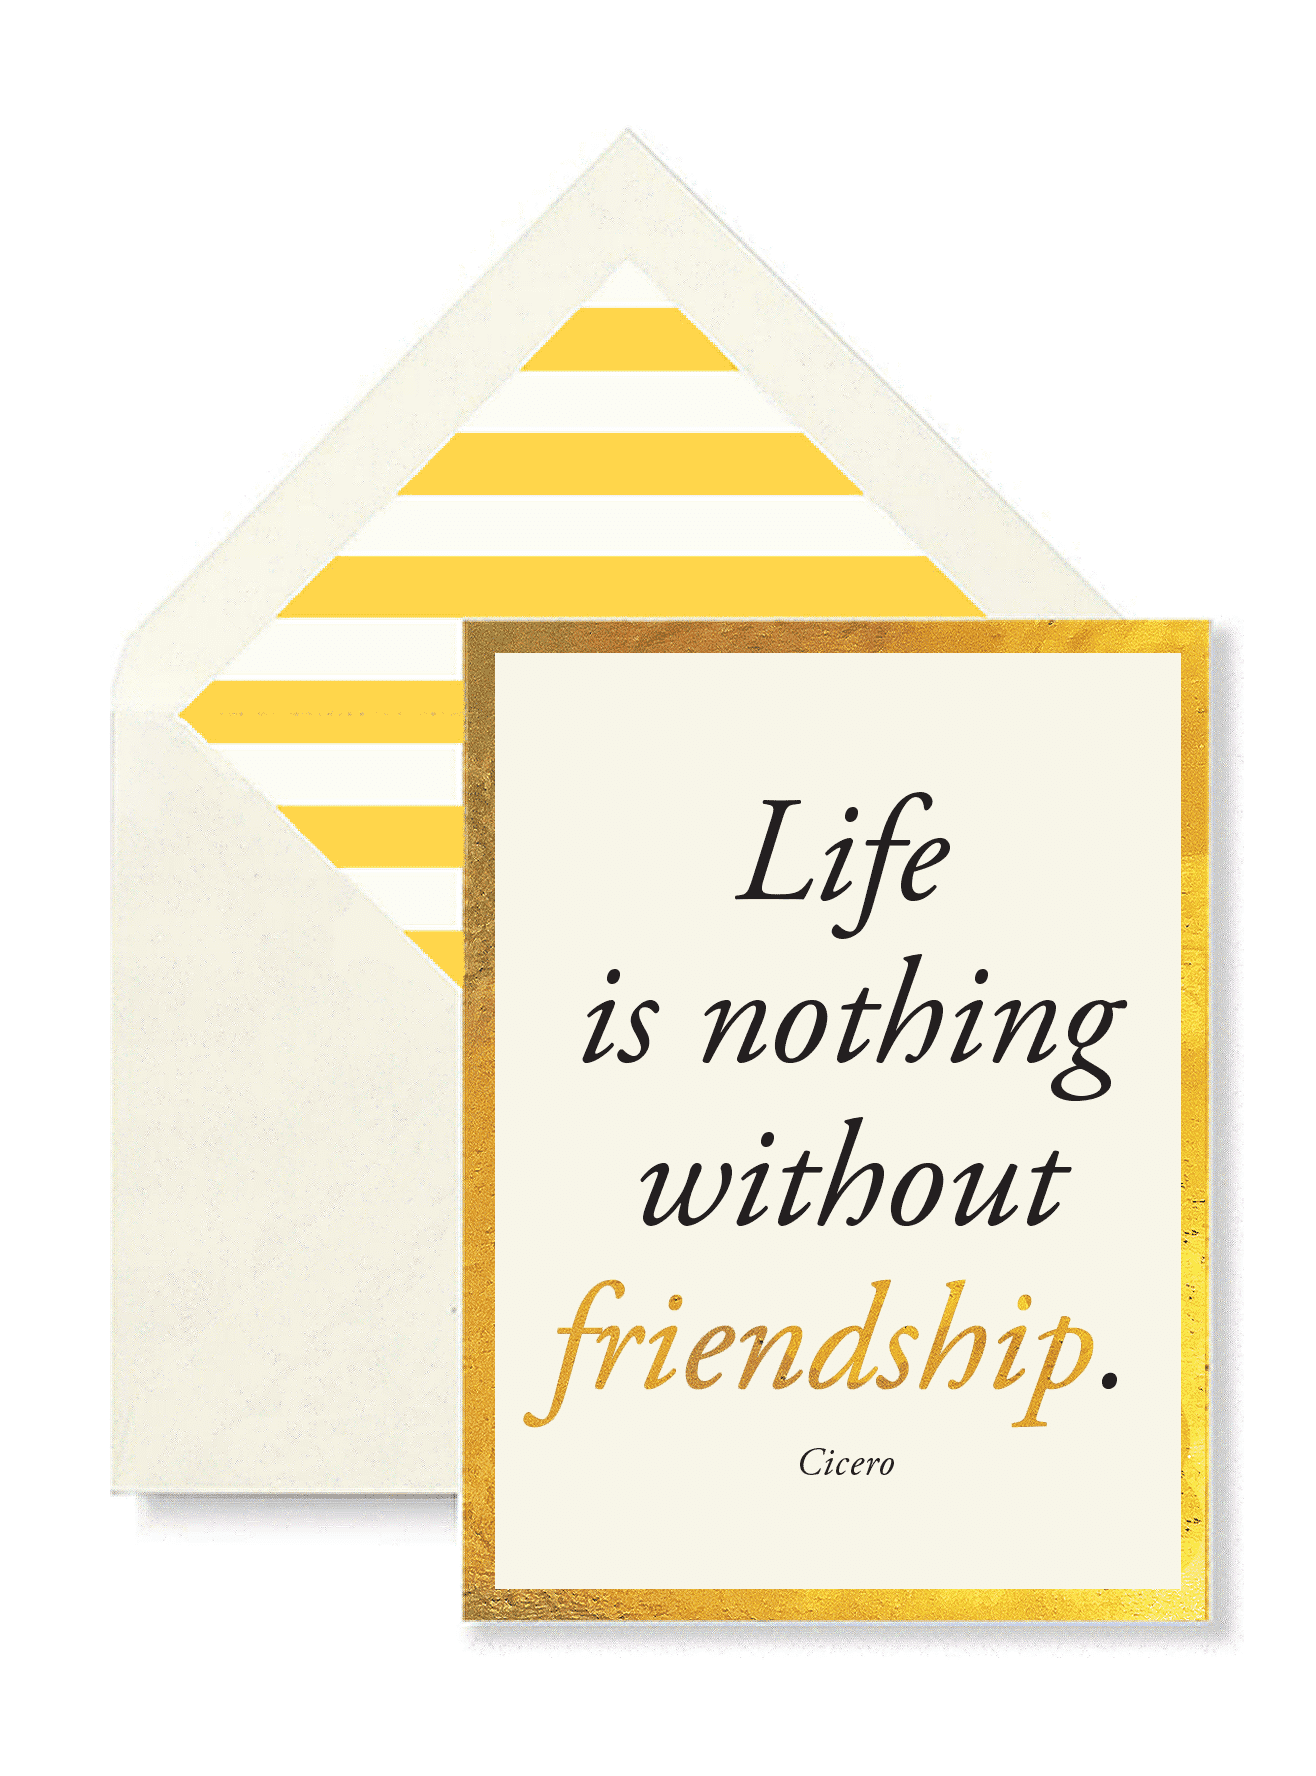 Bensgarden.com | Life Is Nothing Without Friendship Greeting Card, Single Folded Card or Boxed Set of 8 - Ben's Garden. Made in New York City.